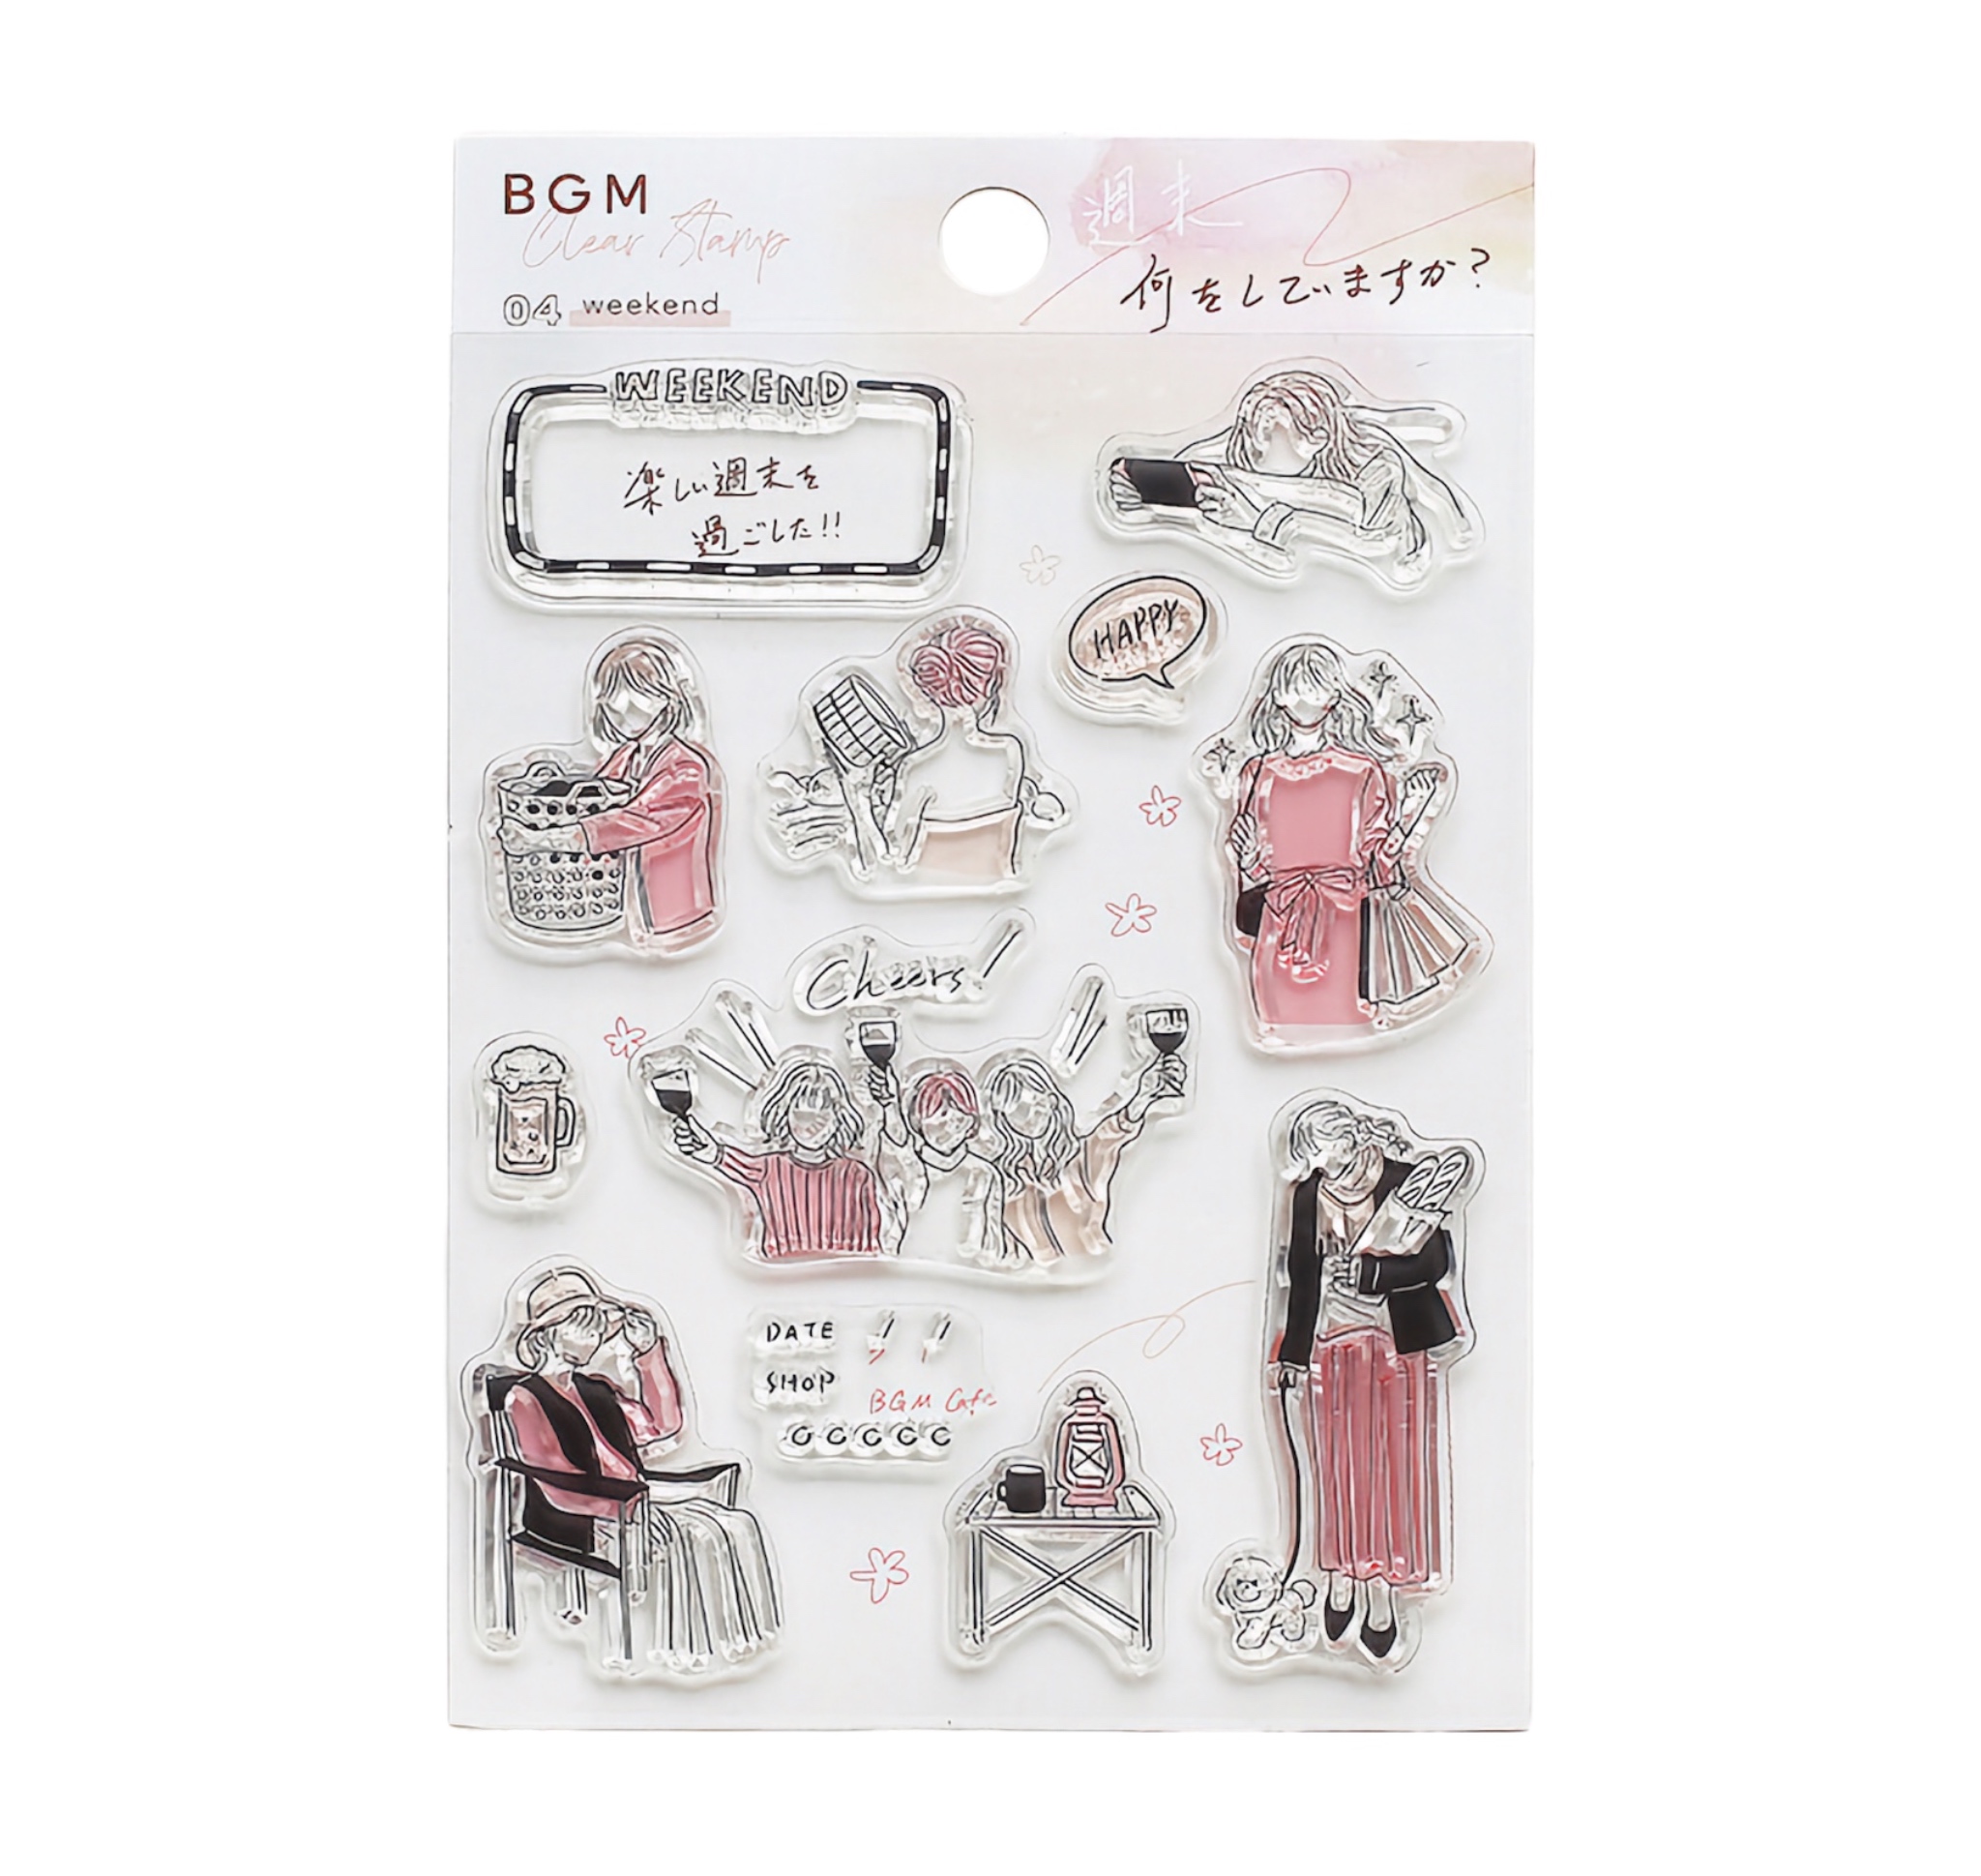 BGM Clear Stamp Adult Girls / Weekends